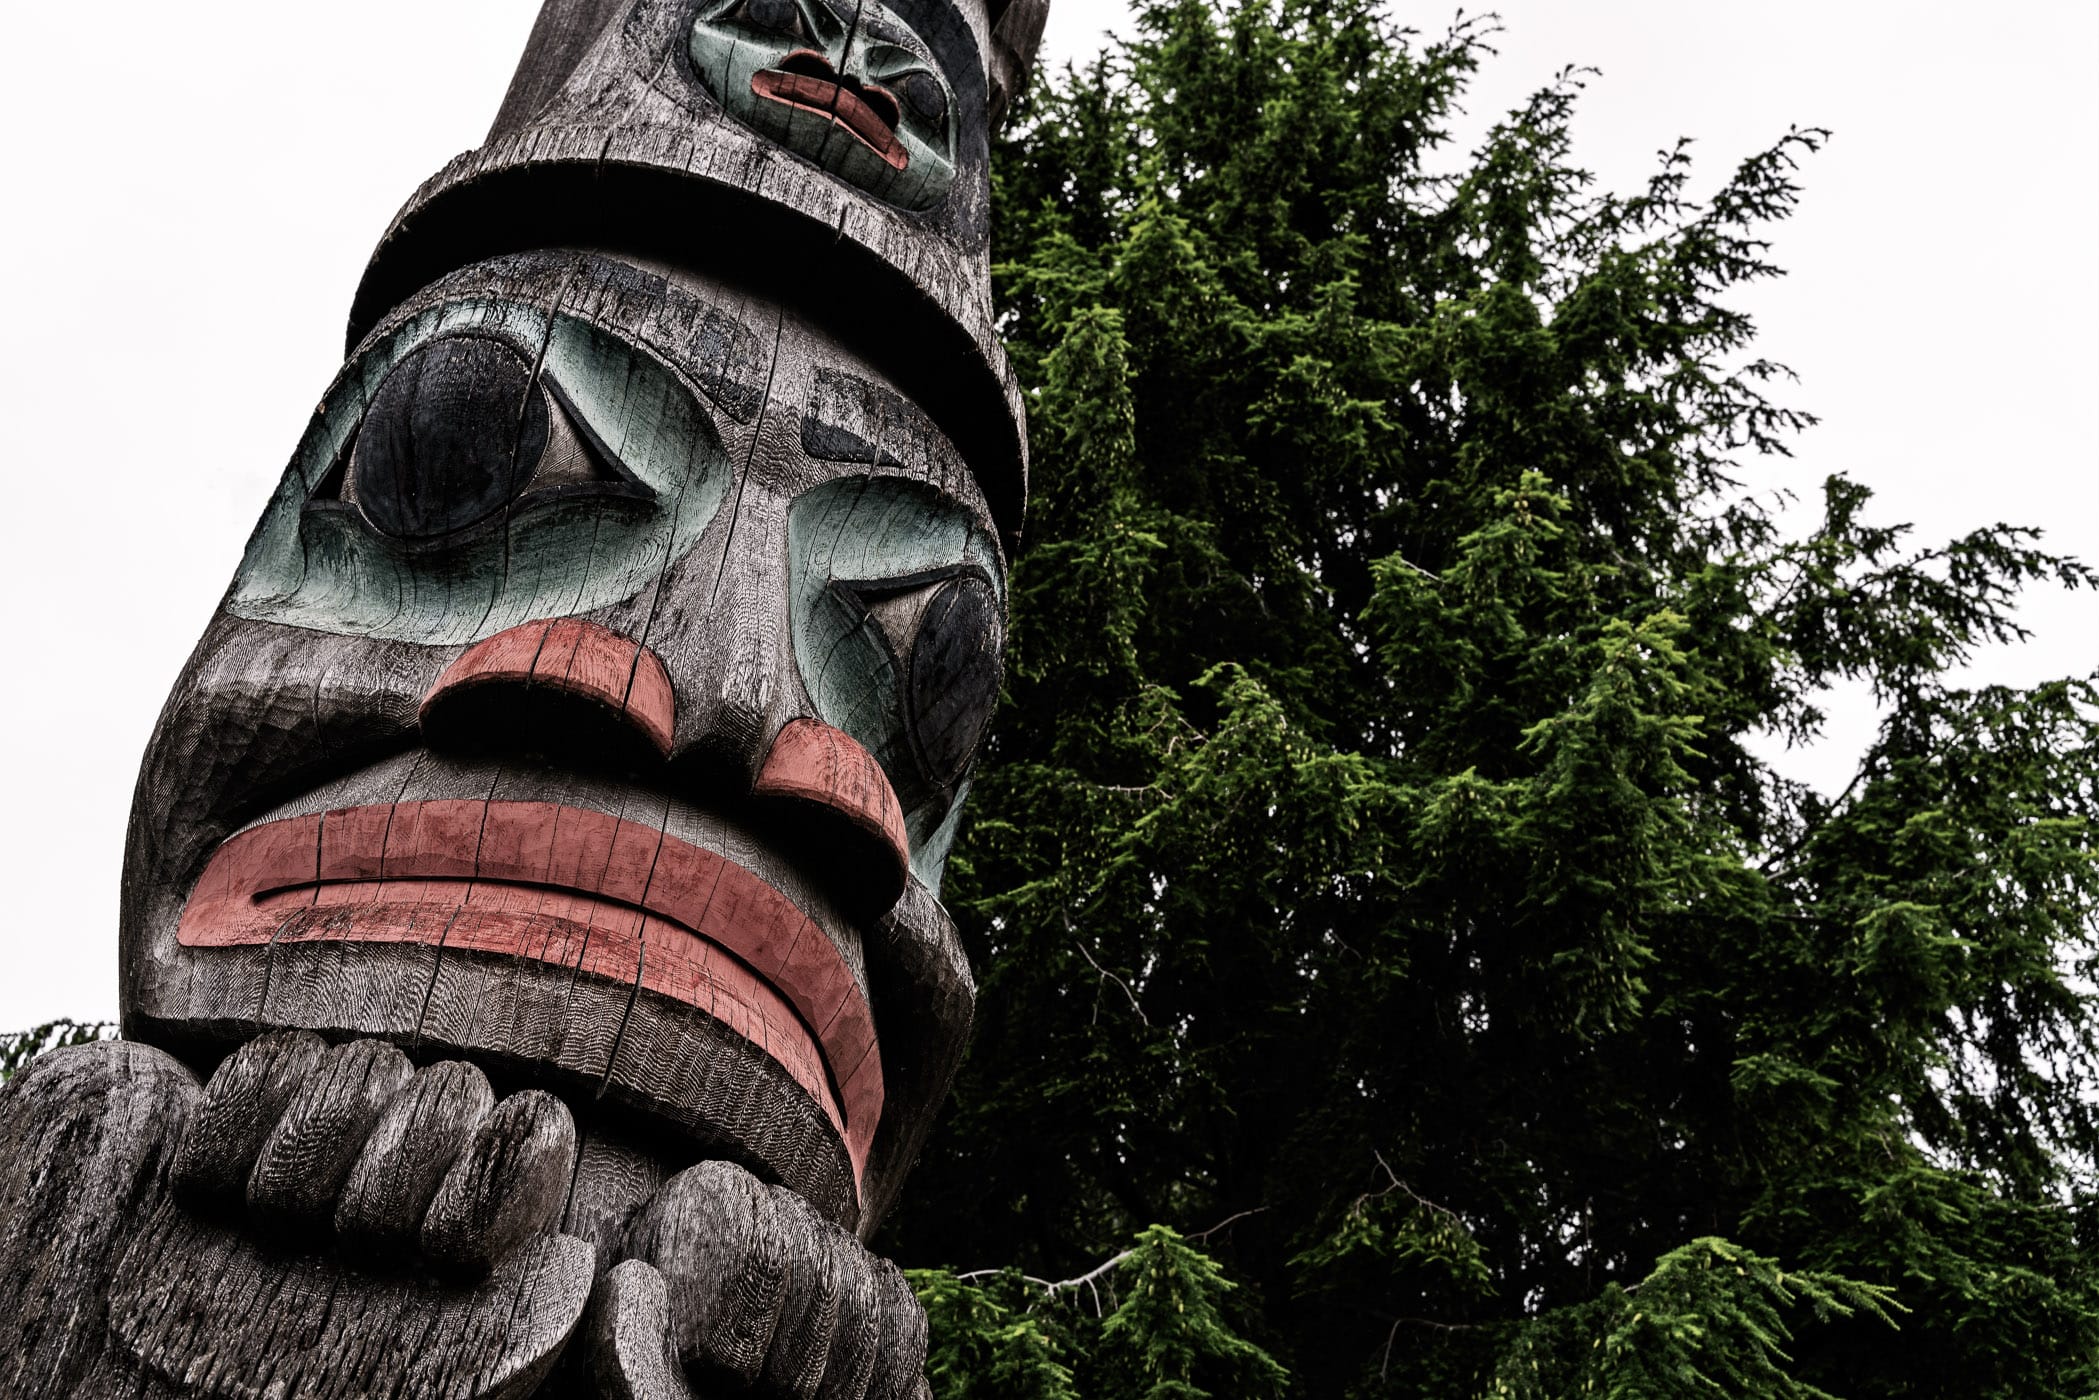 Detail of a totem pole spotted in Ketchikan, Alaska.